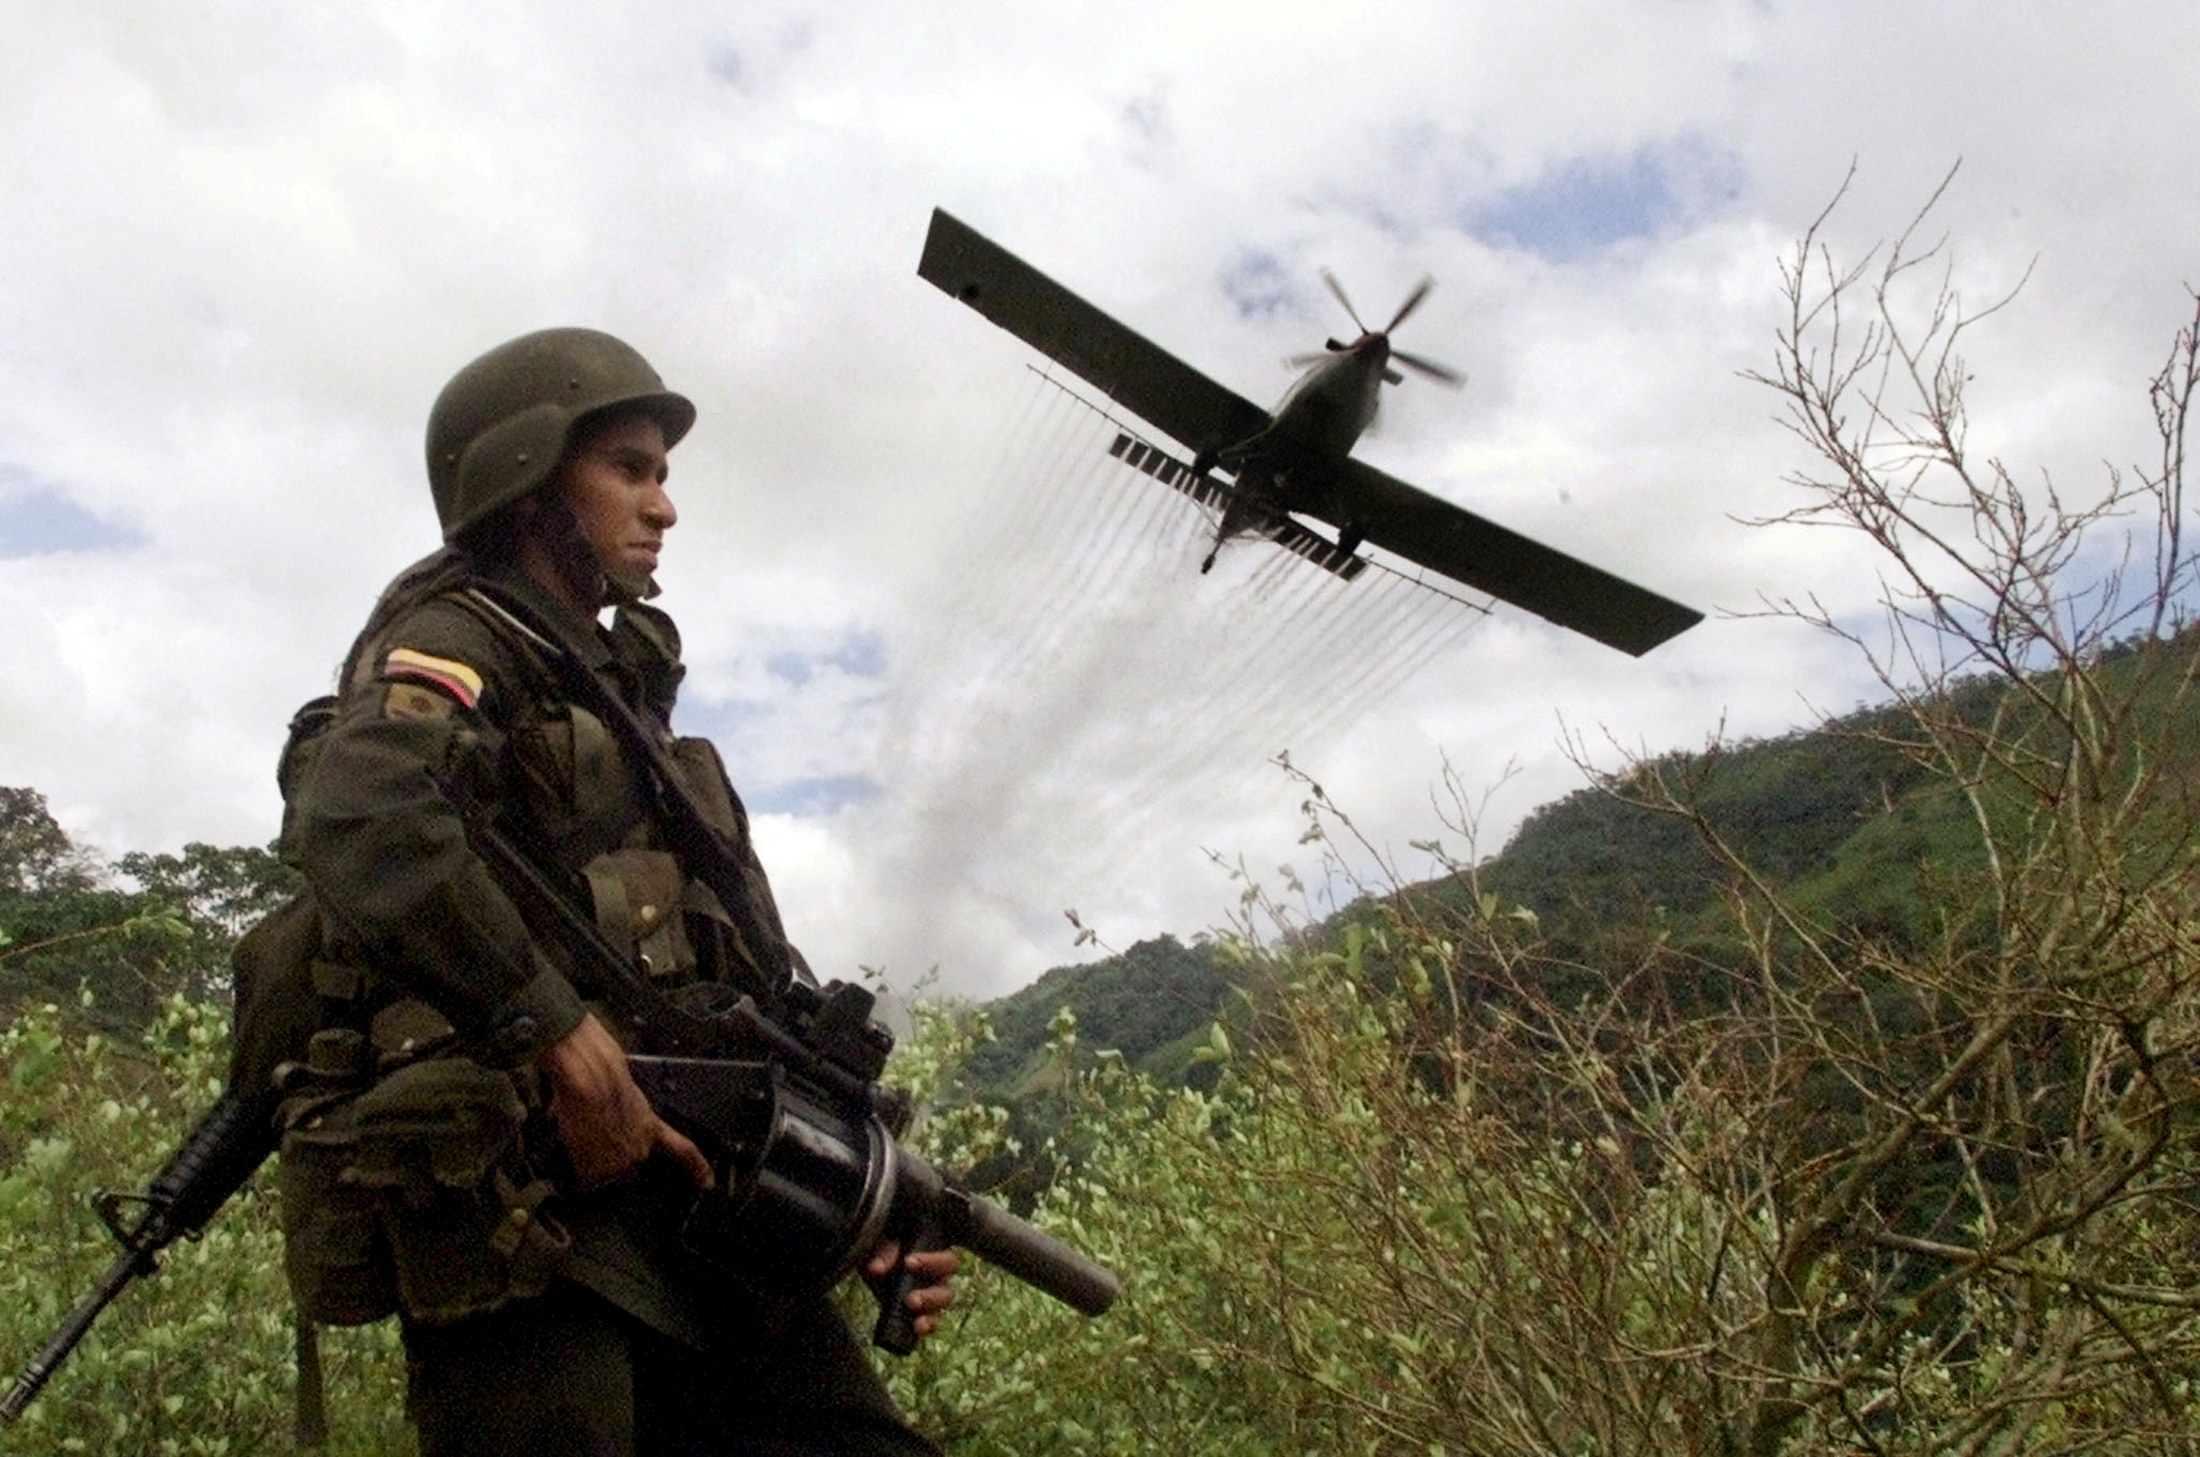 FILE PHOTO: A Turbo Thrush aircraft sprays coca leaf crops with glyphosate in the rural area of Tarazá, in the department of Antioquia, Colombia, November 30, 2020. REUTERS/Eliana Aponte/File Photo